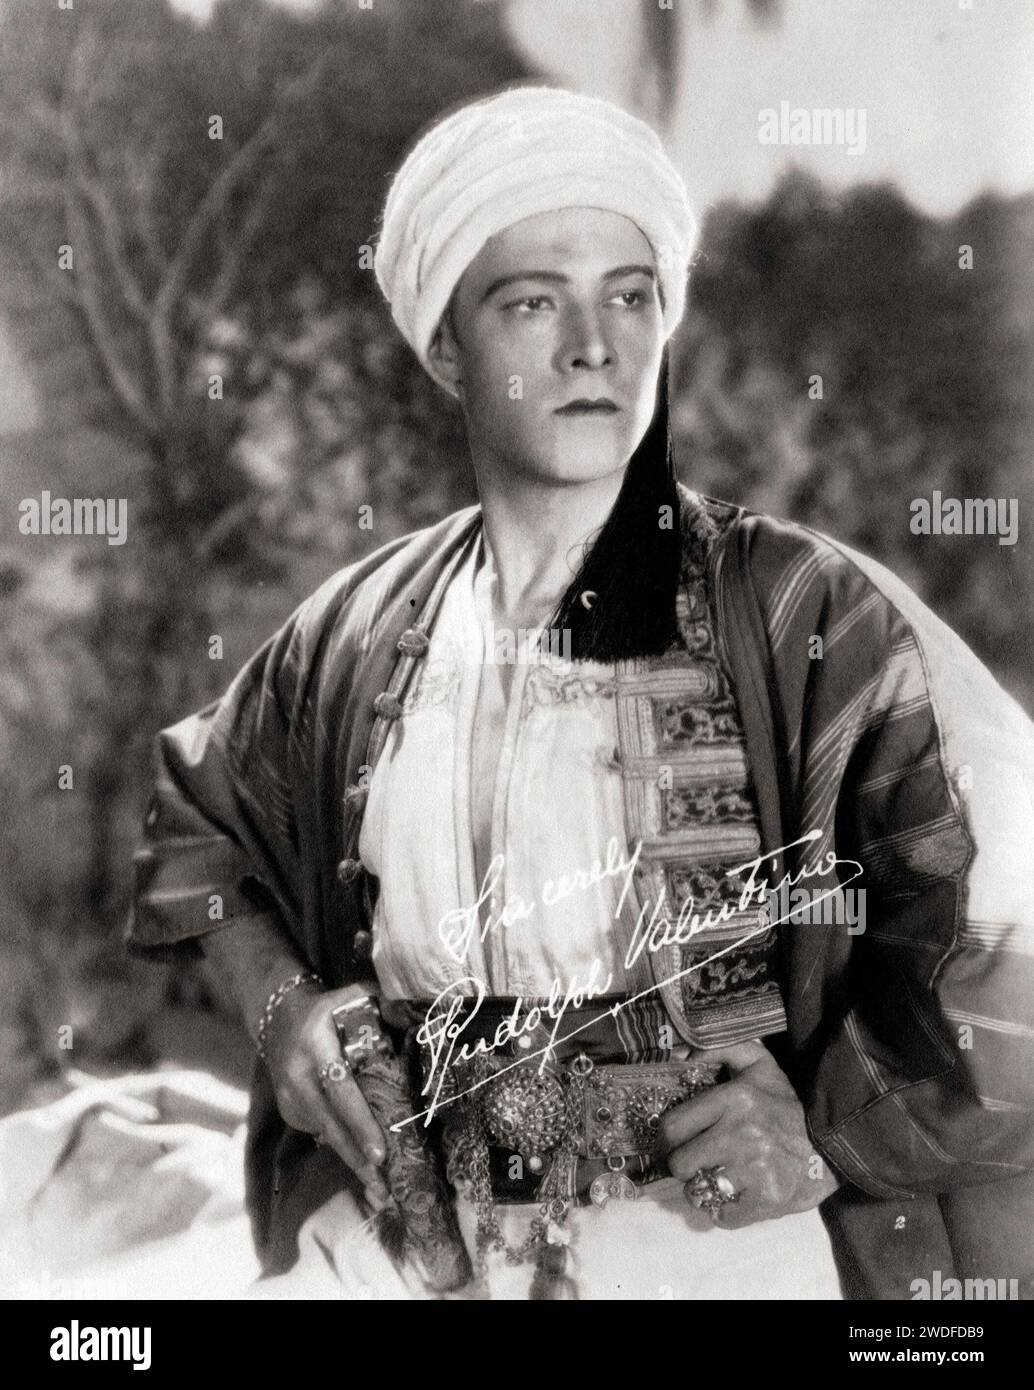 Actor Rudolph Valentino fan photo with autograph, 1920s Stock Photo